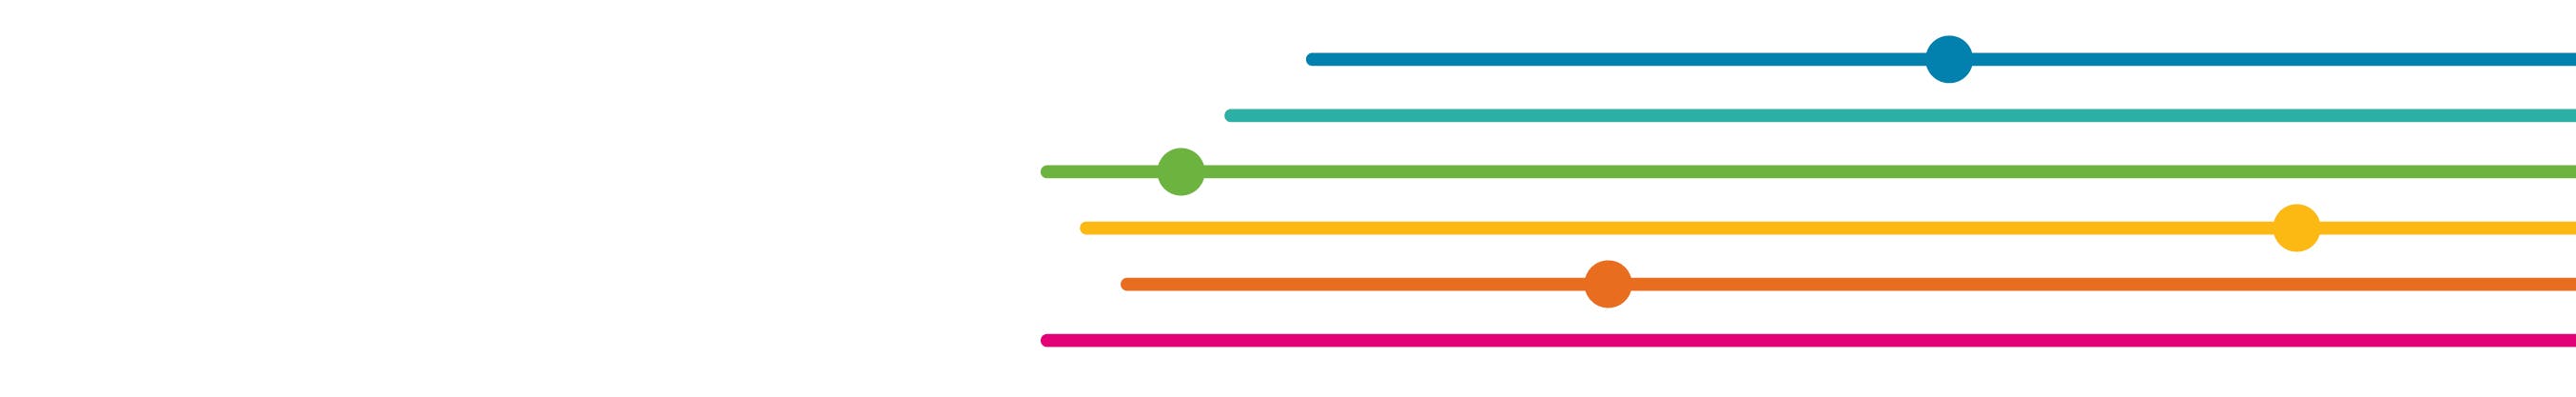 Six parallel lines indicating the idea of different bus routes travelling along parallel roads.